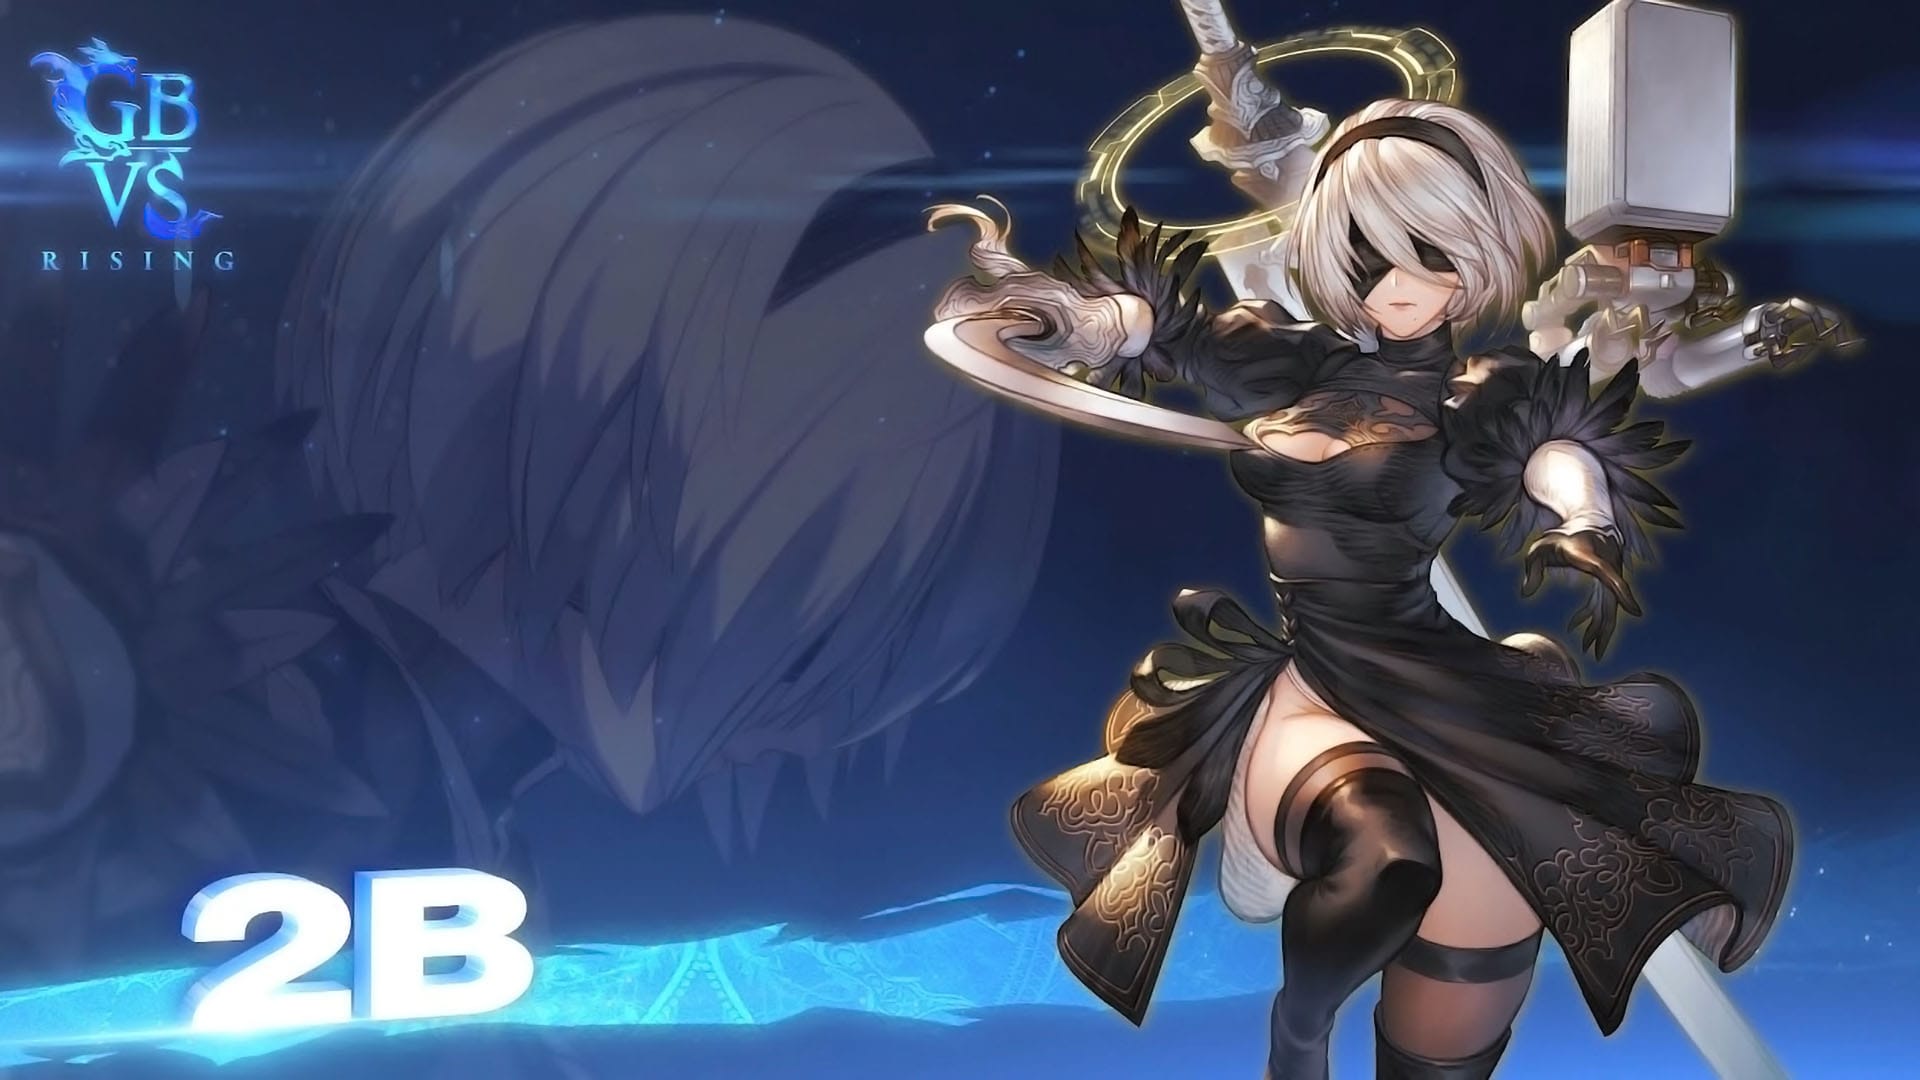 2B From NieR: Automata Invades Another Universe as Granblue Fantasy Versus: Rising Reveals Gameplay